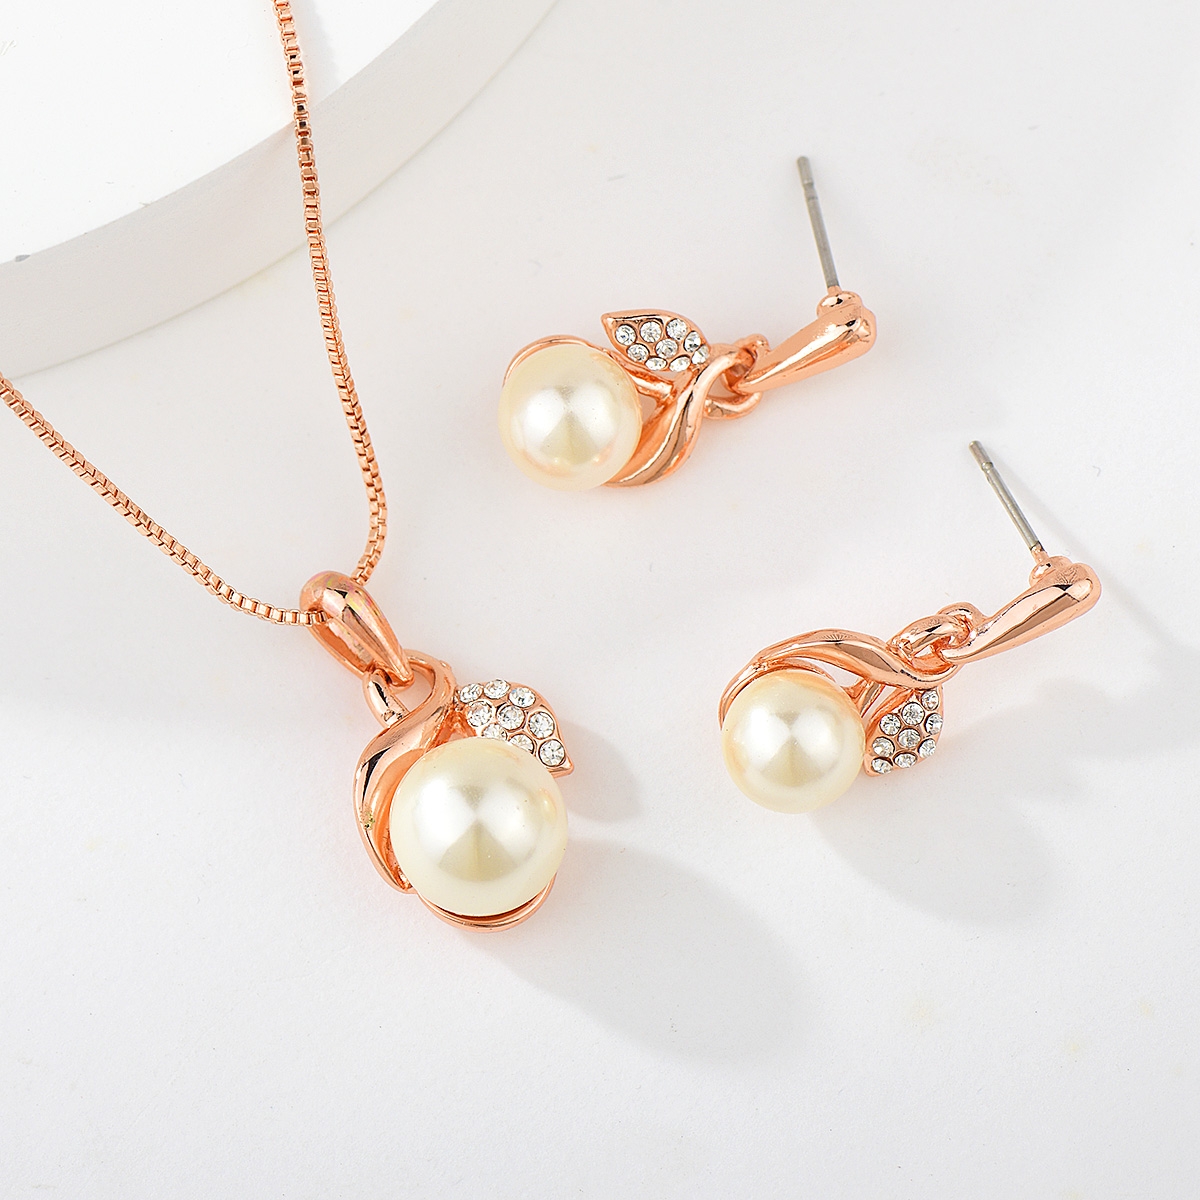 Charming White Artificial Pearl 2 Piece Jewelry Set